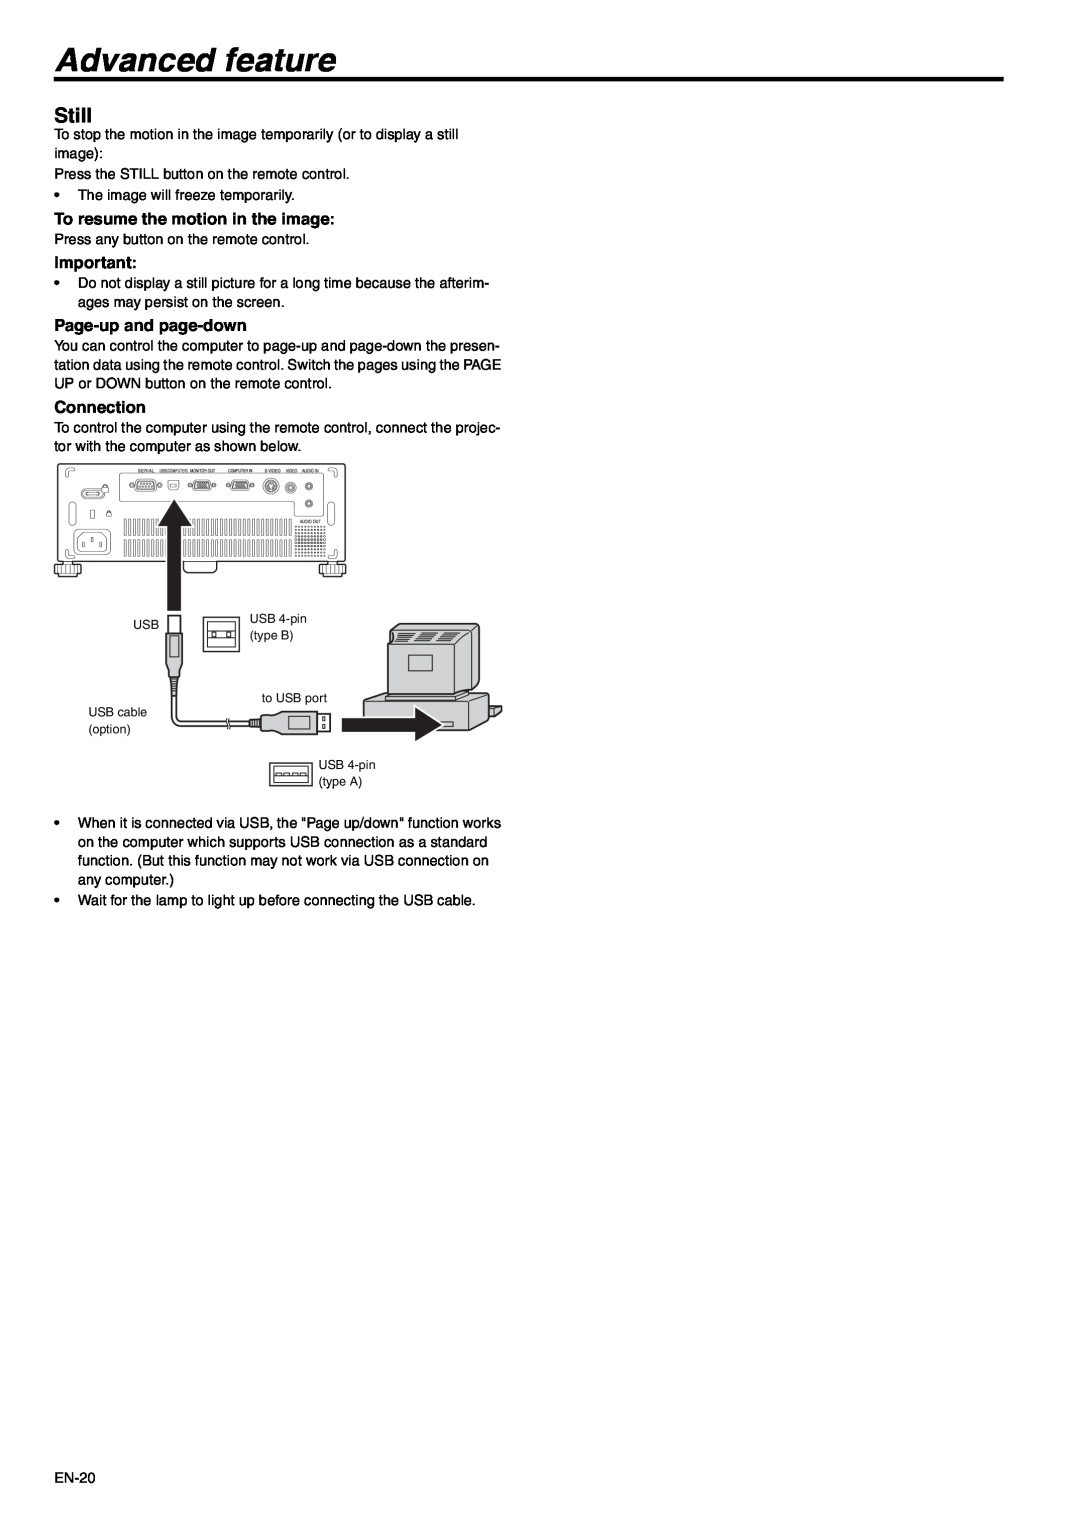 Mitsubishi Electronics SD105U user manual Advanced feature, Still, To resume the motion in the image, Page-up and page-down 